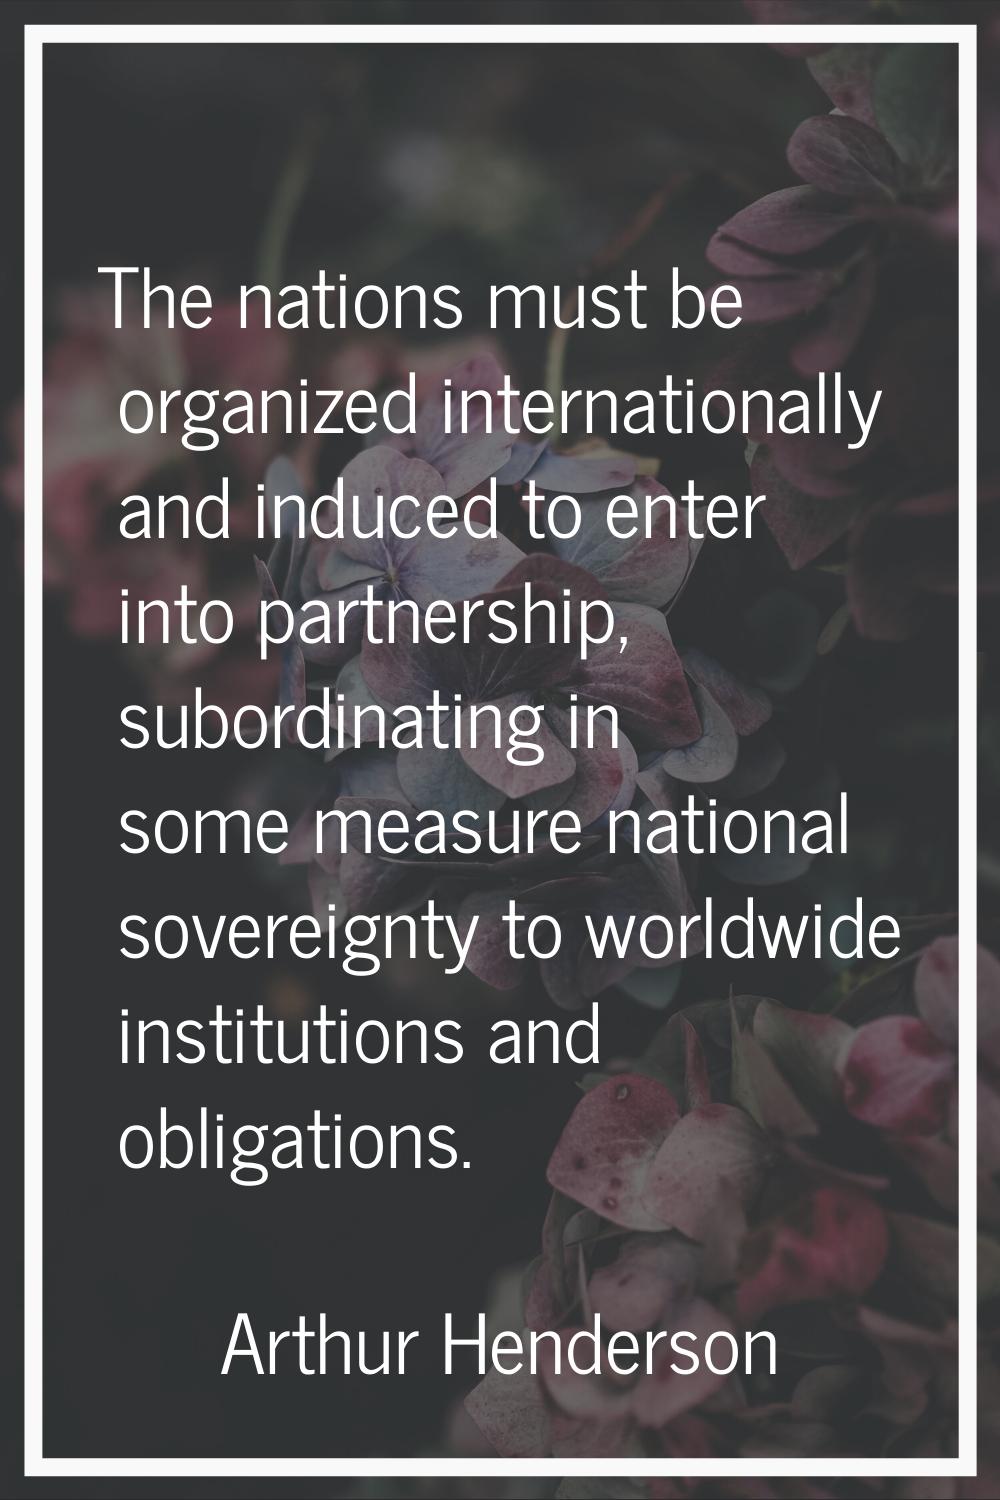 The nations must be organized internationally and induced to enter into partnership, subordinating 